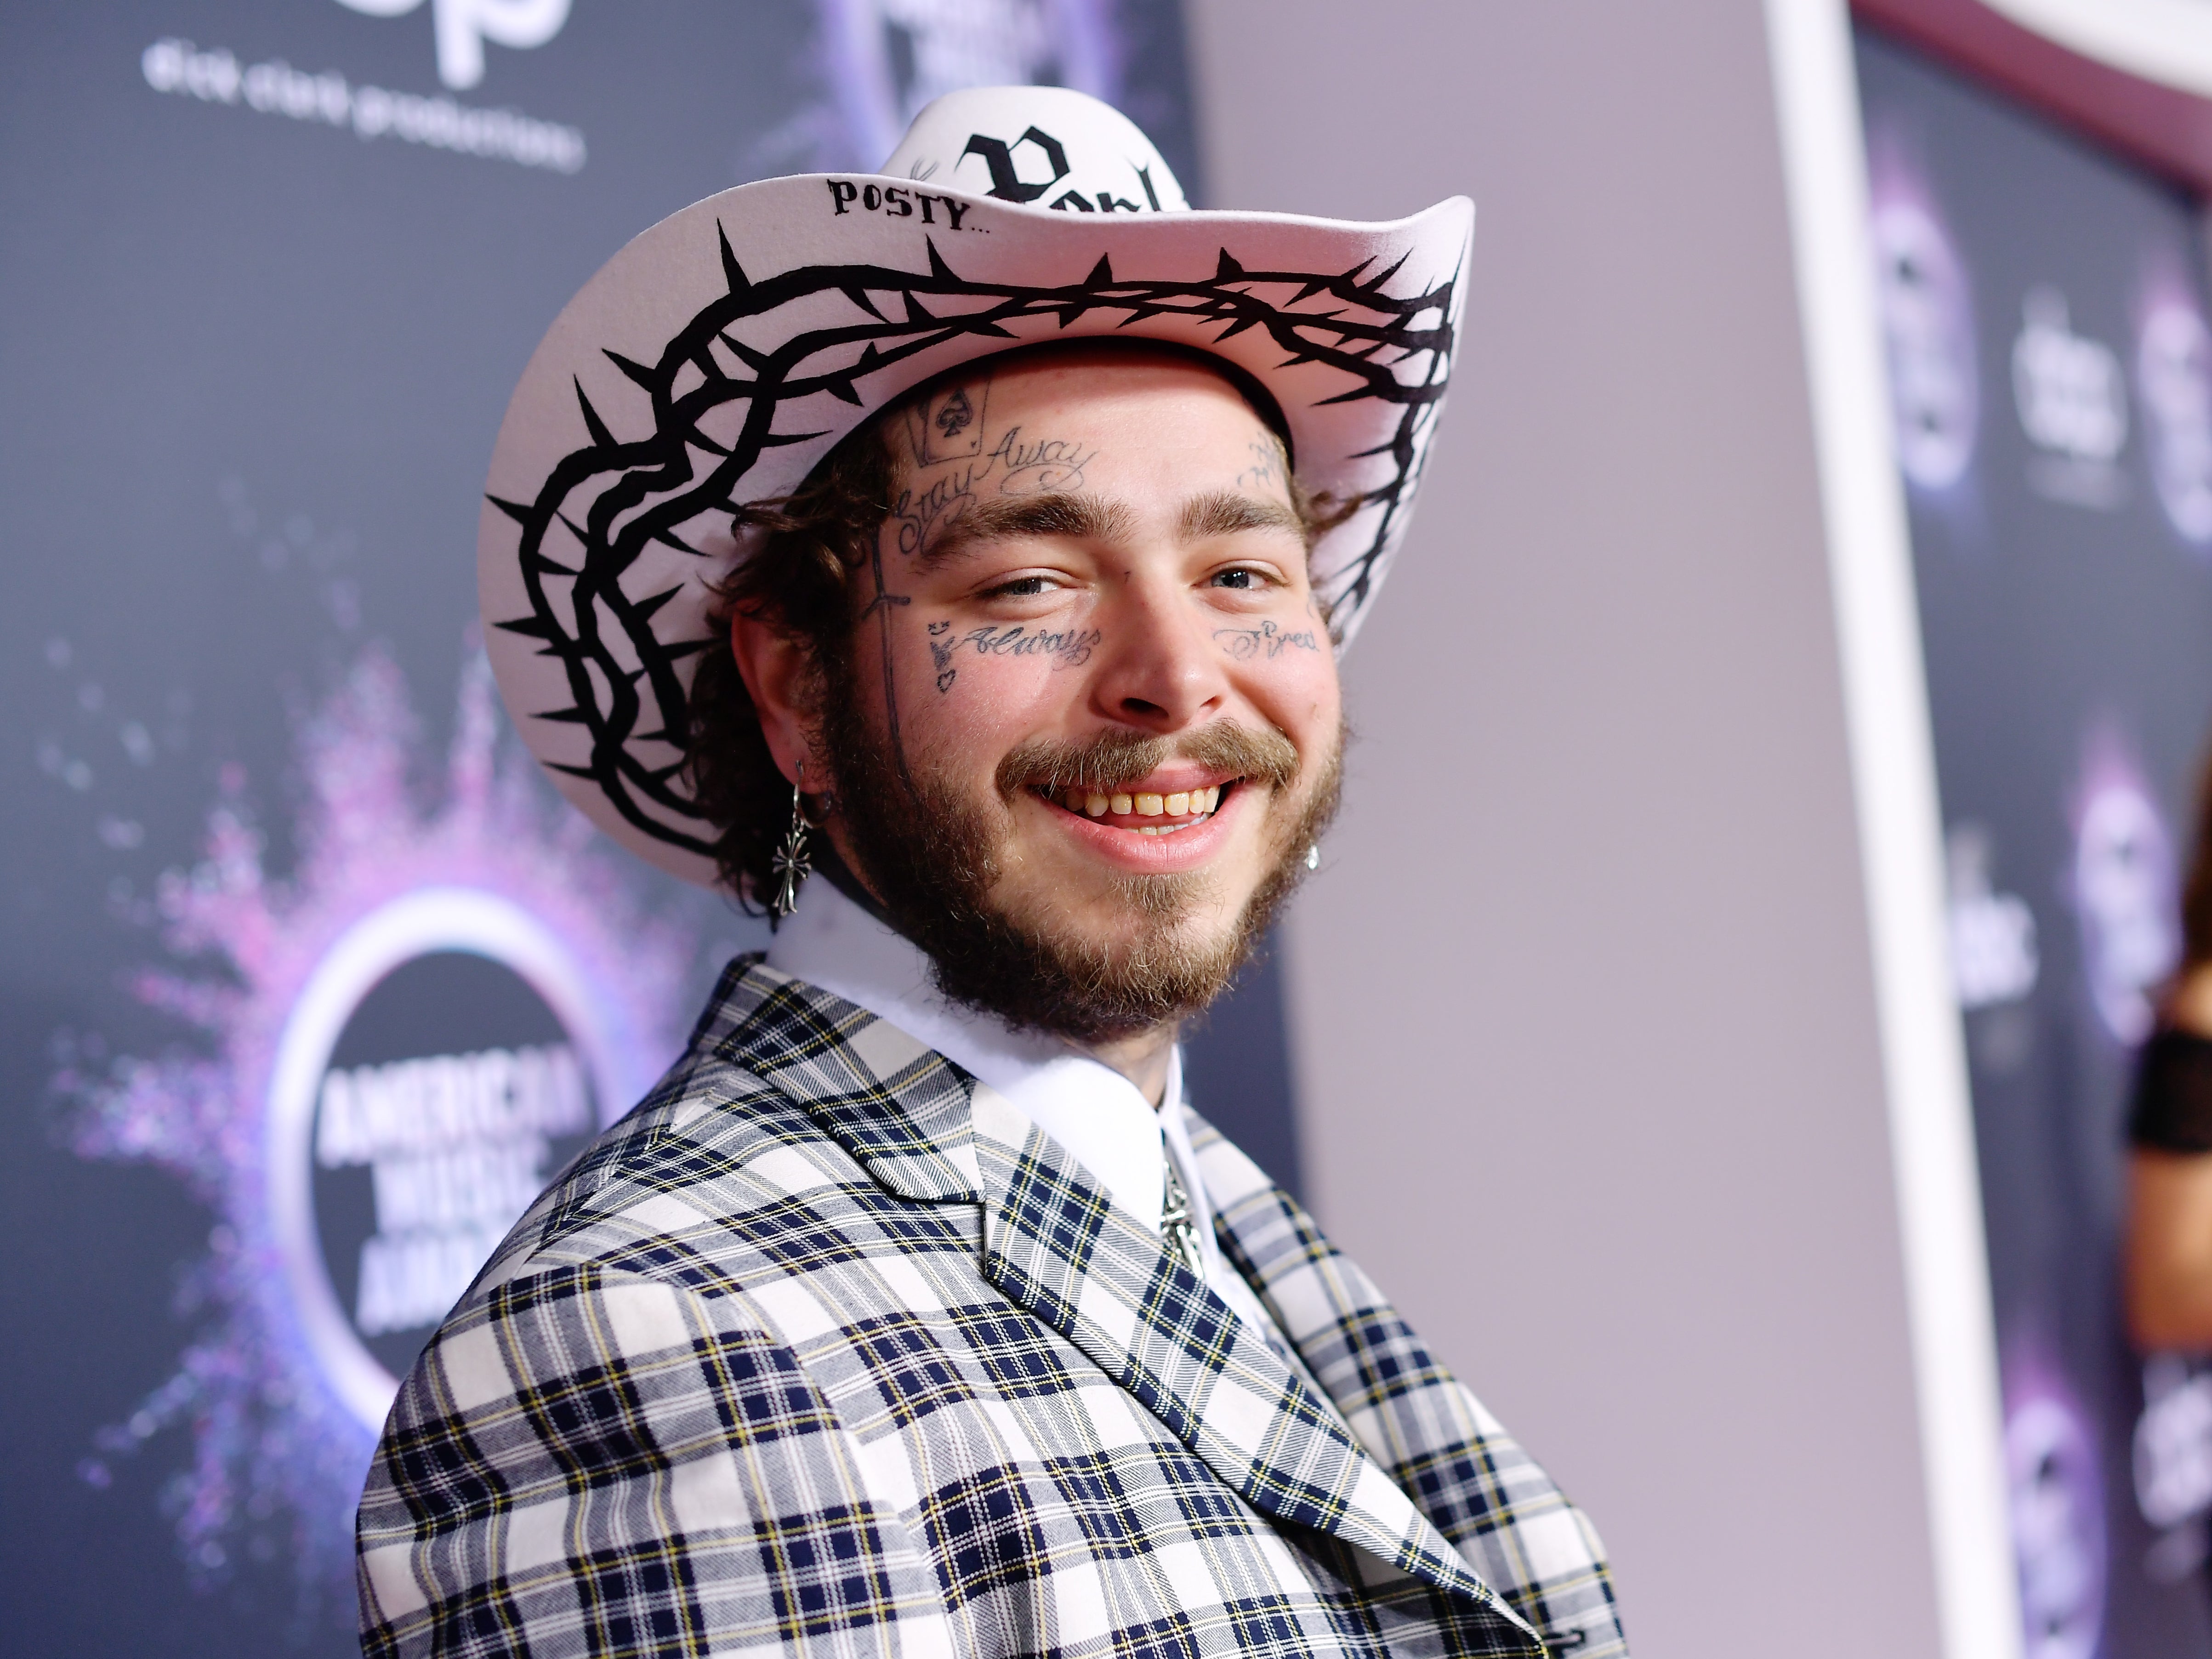 Post Malone attends the 2019 American Music Awards at Microsoft Theater